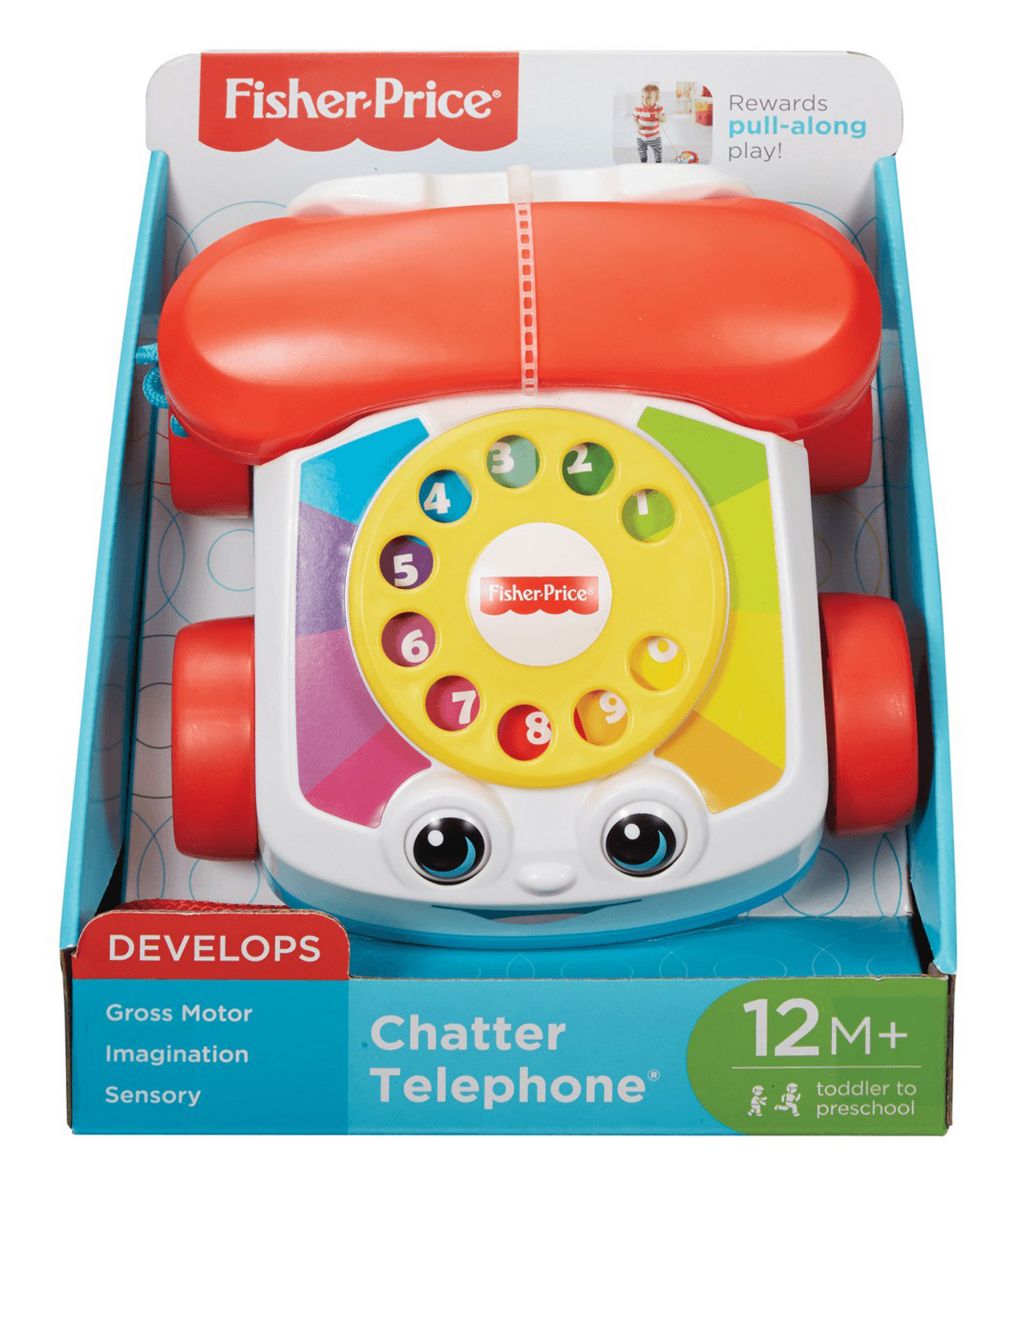 Chatter Telephone (1+ yrs) image 2